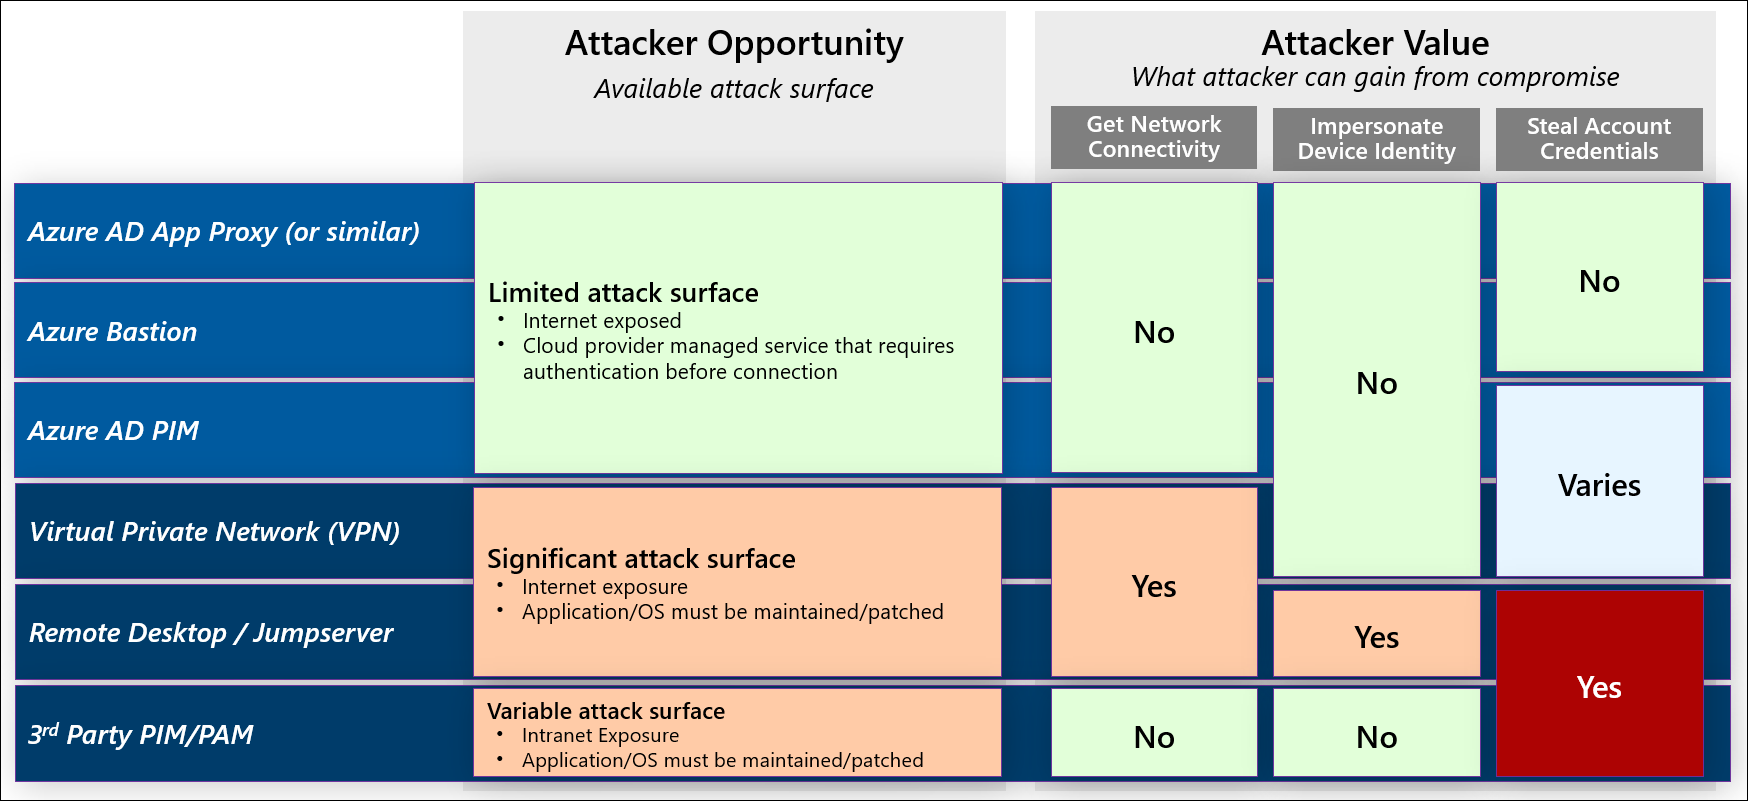 Comparing attacker opportunity and value for given intermediaries